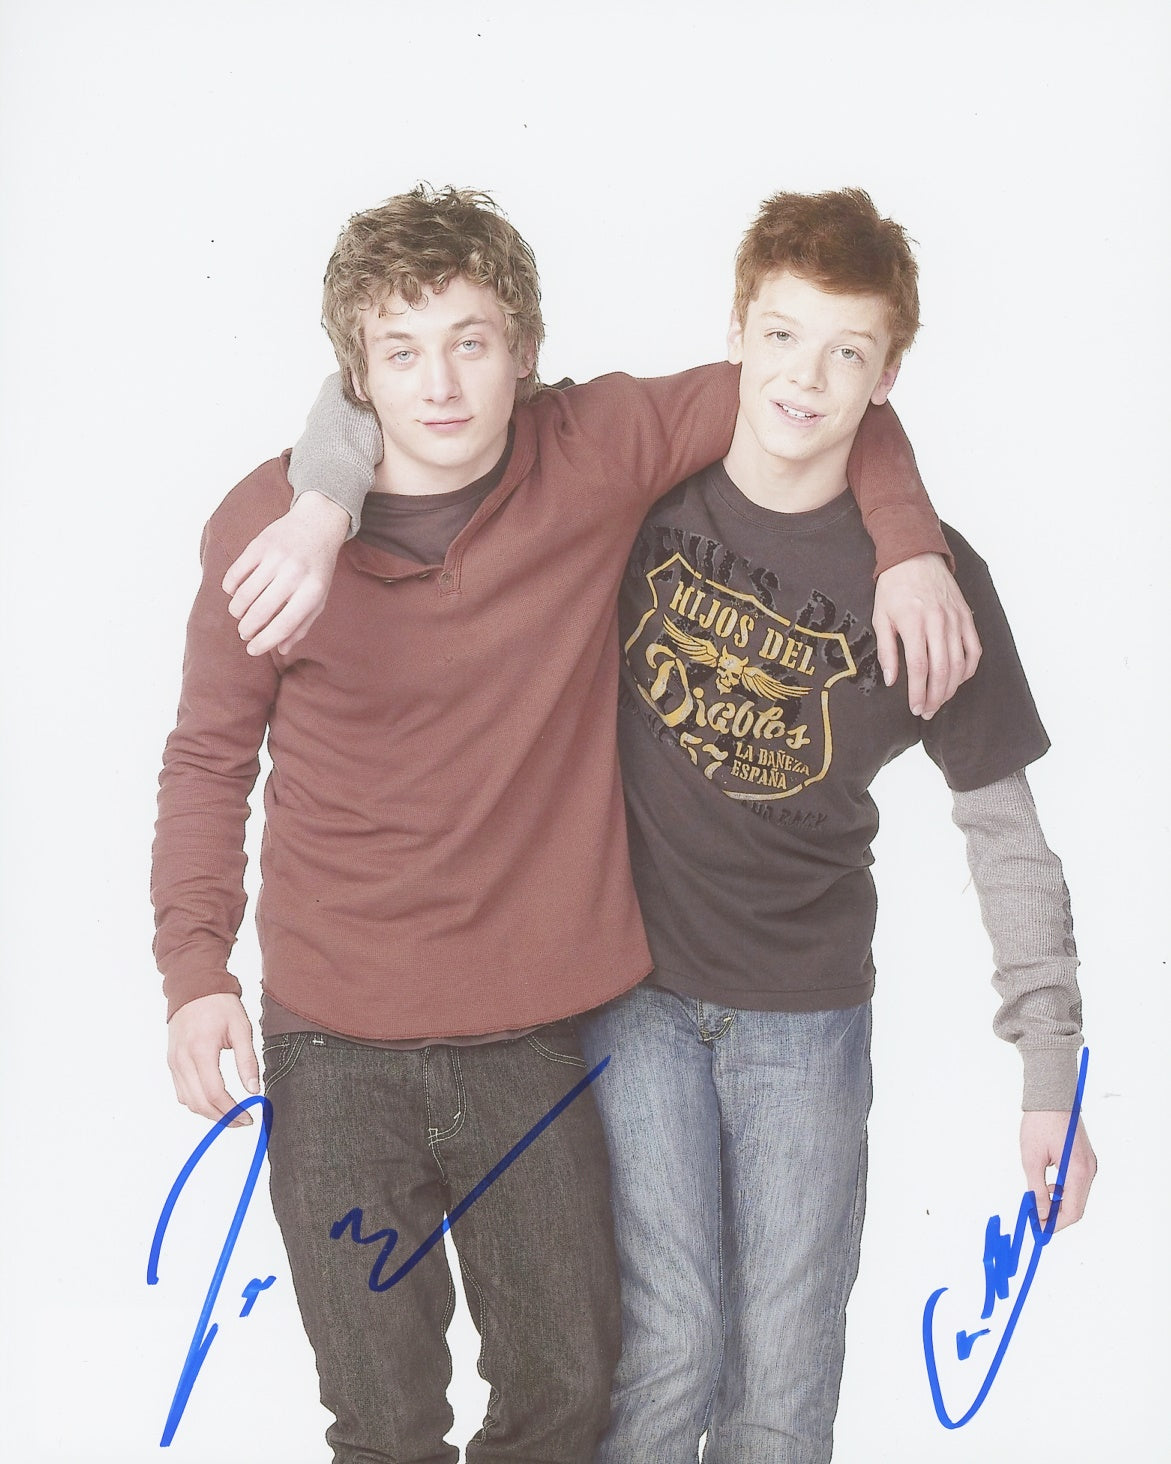 Jeremy Allen White & Cameron Monaghan Signed 8x10 Photo